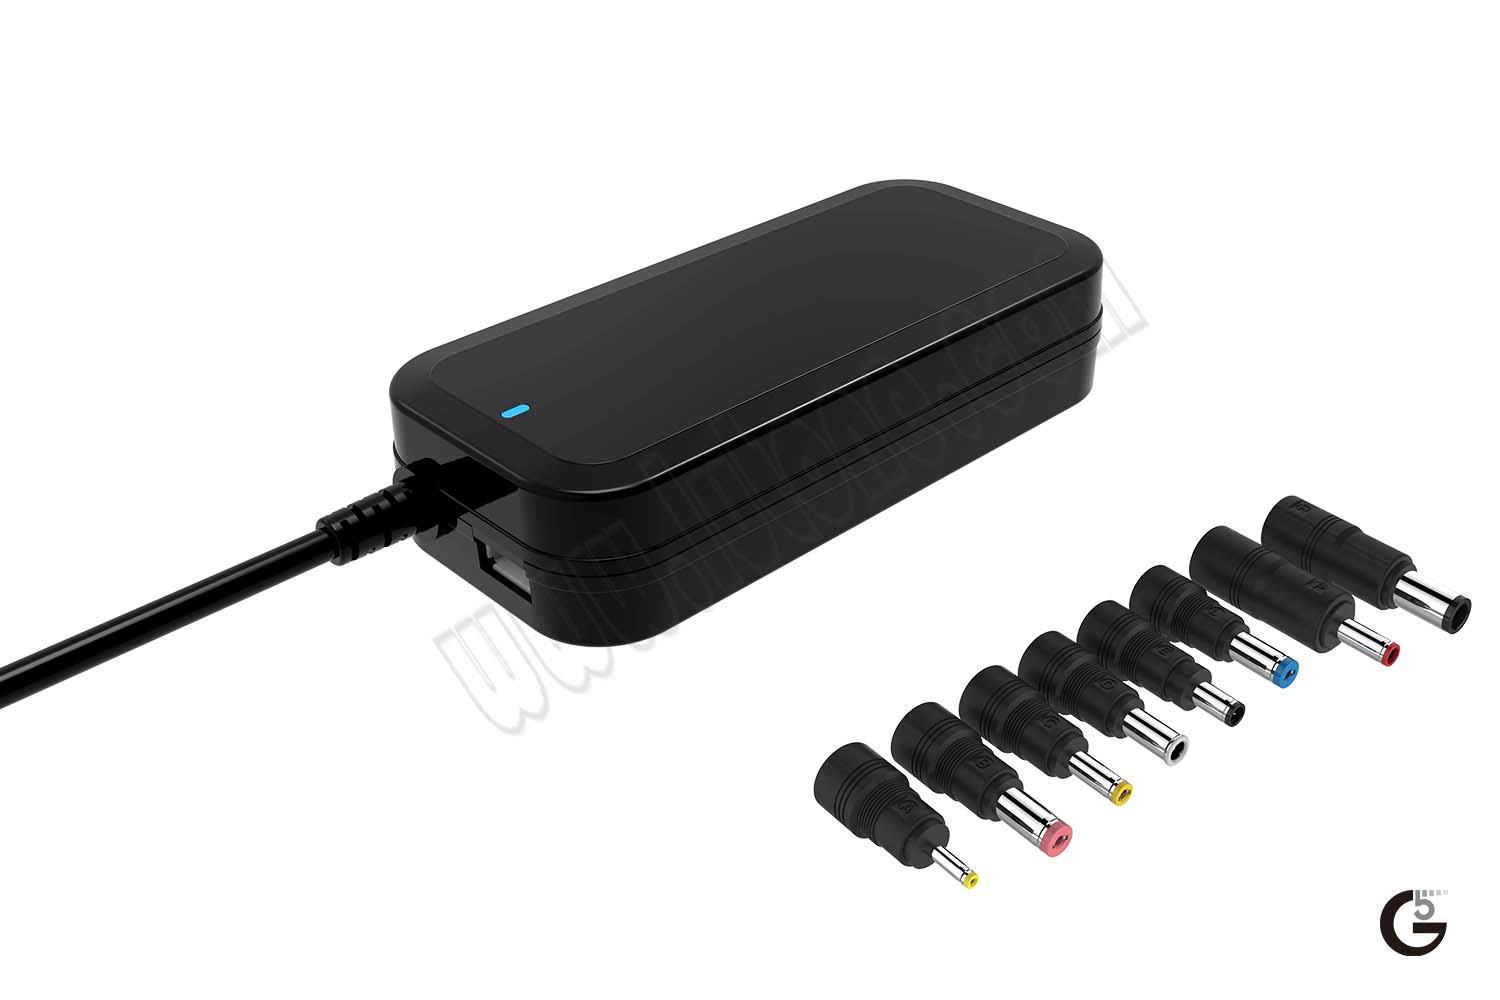 universal laptop charger